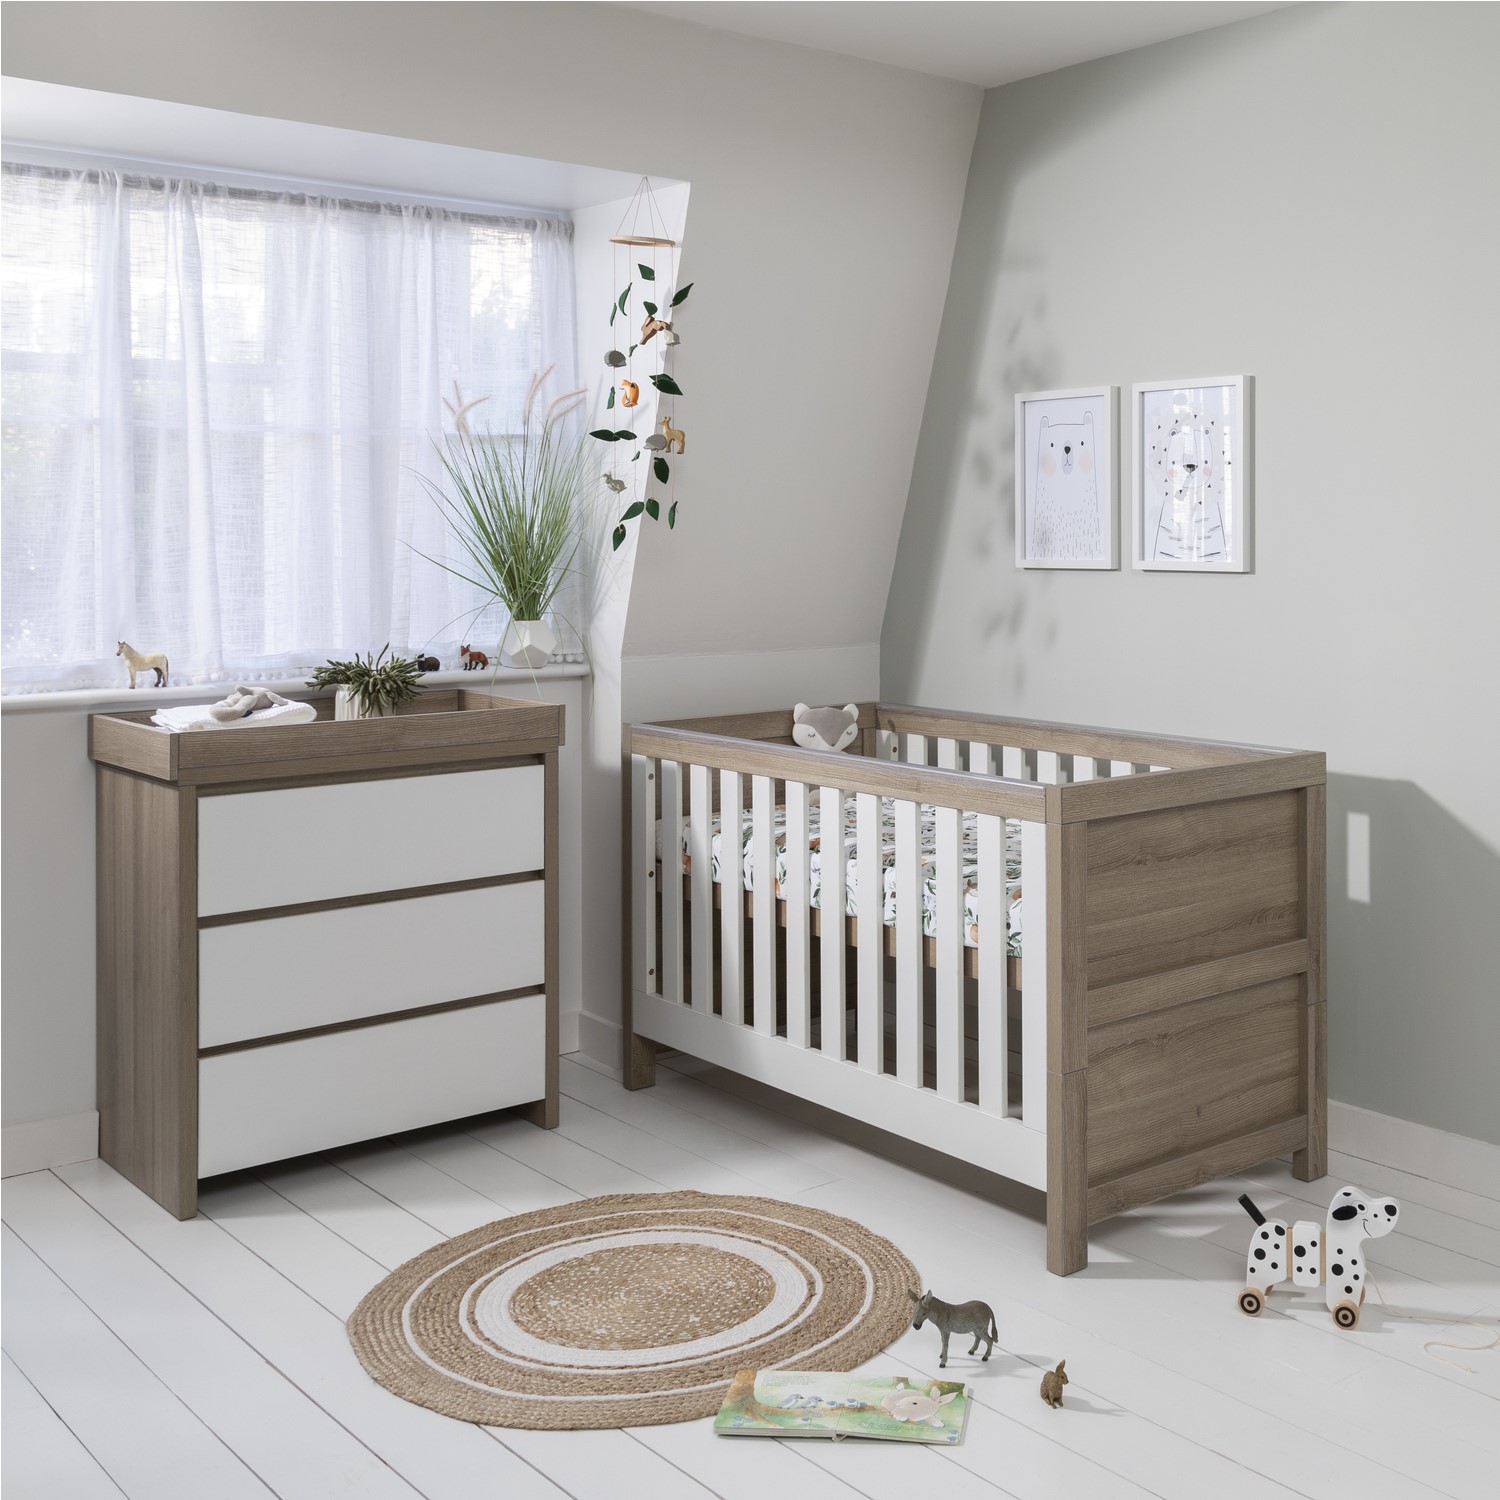 Photo of 2 piece nursery furniture set with cot bed and changing table in white and oak - modena - tutti bambini